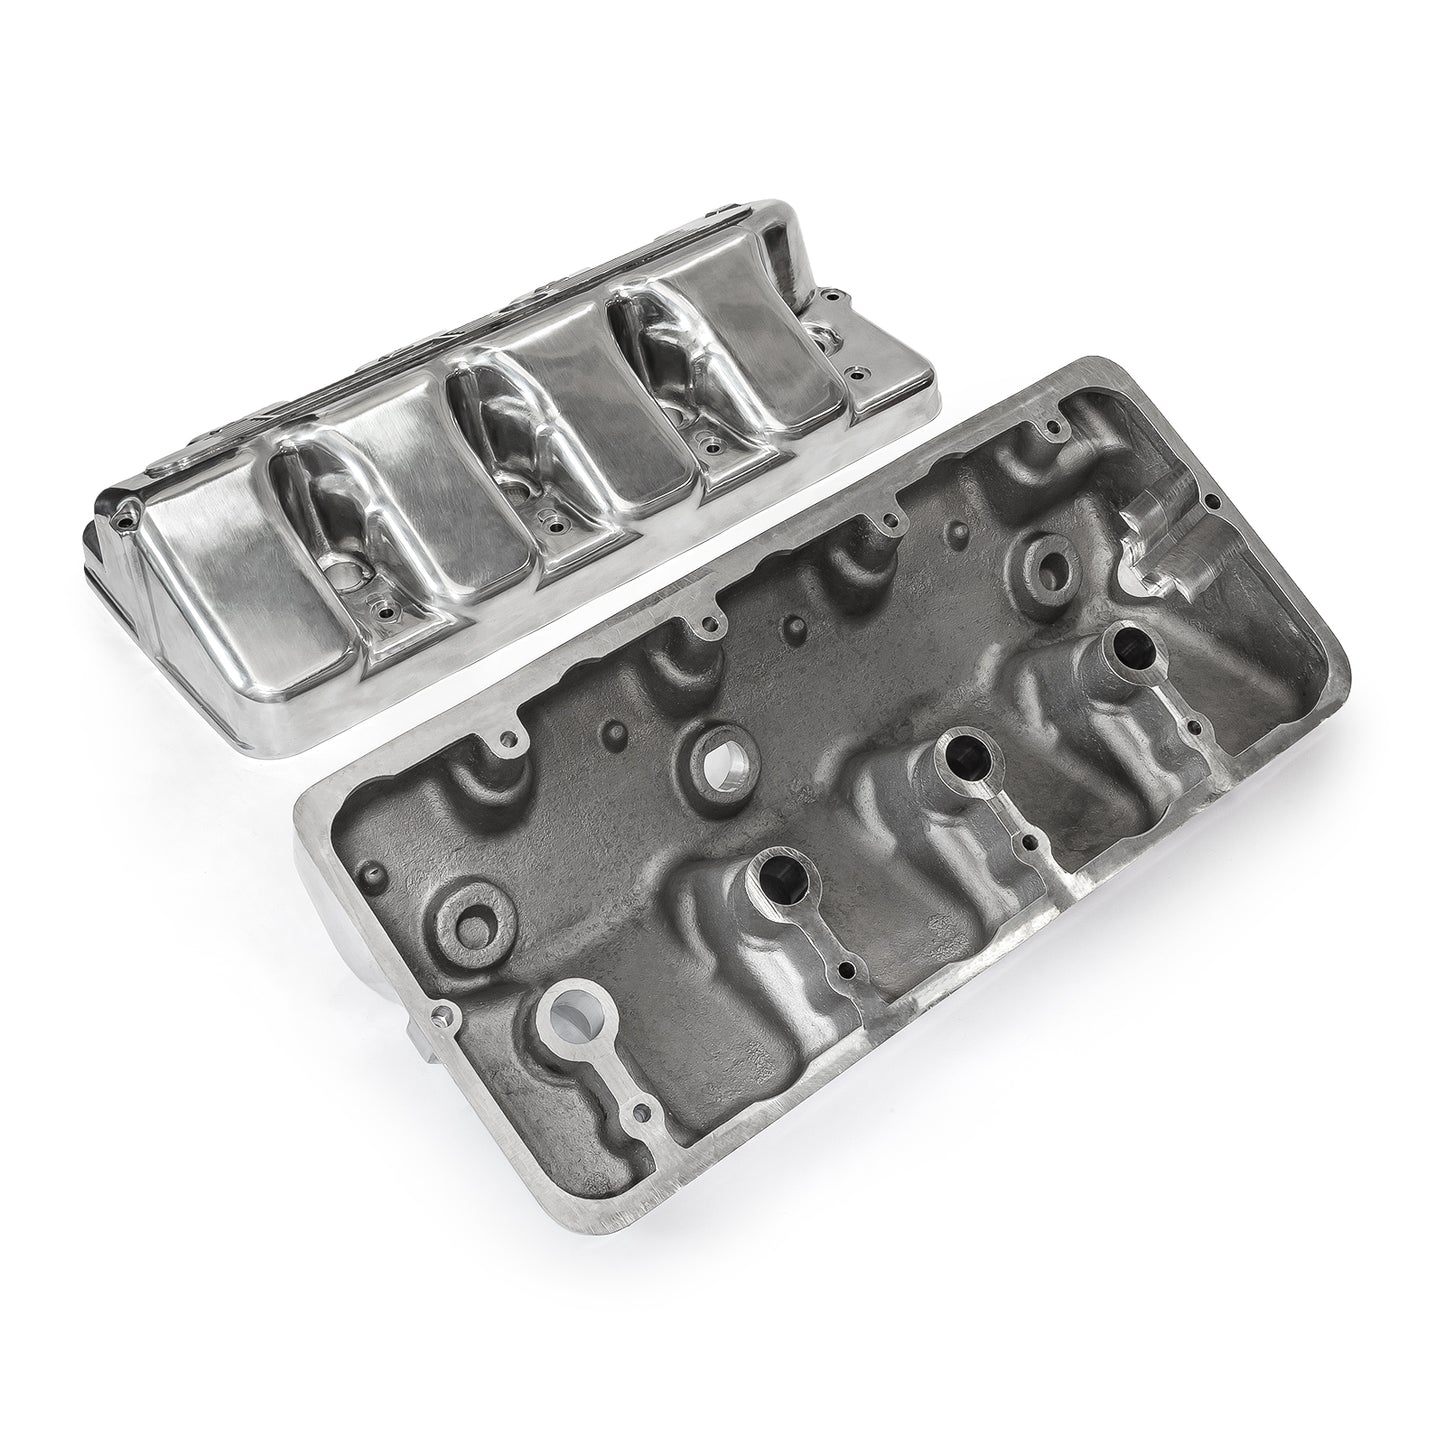 Speedmaster PCE314.1243.05 Fits Ford Boss 429 Cast Aluminum Valve Covers - Polished